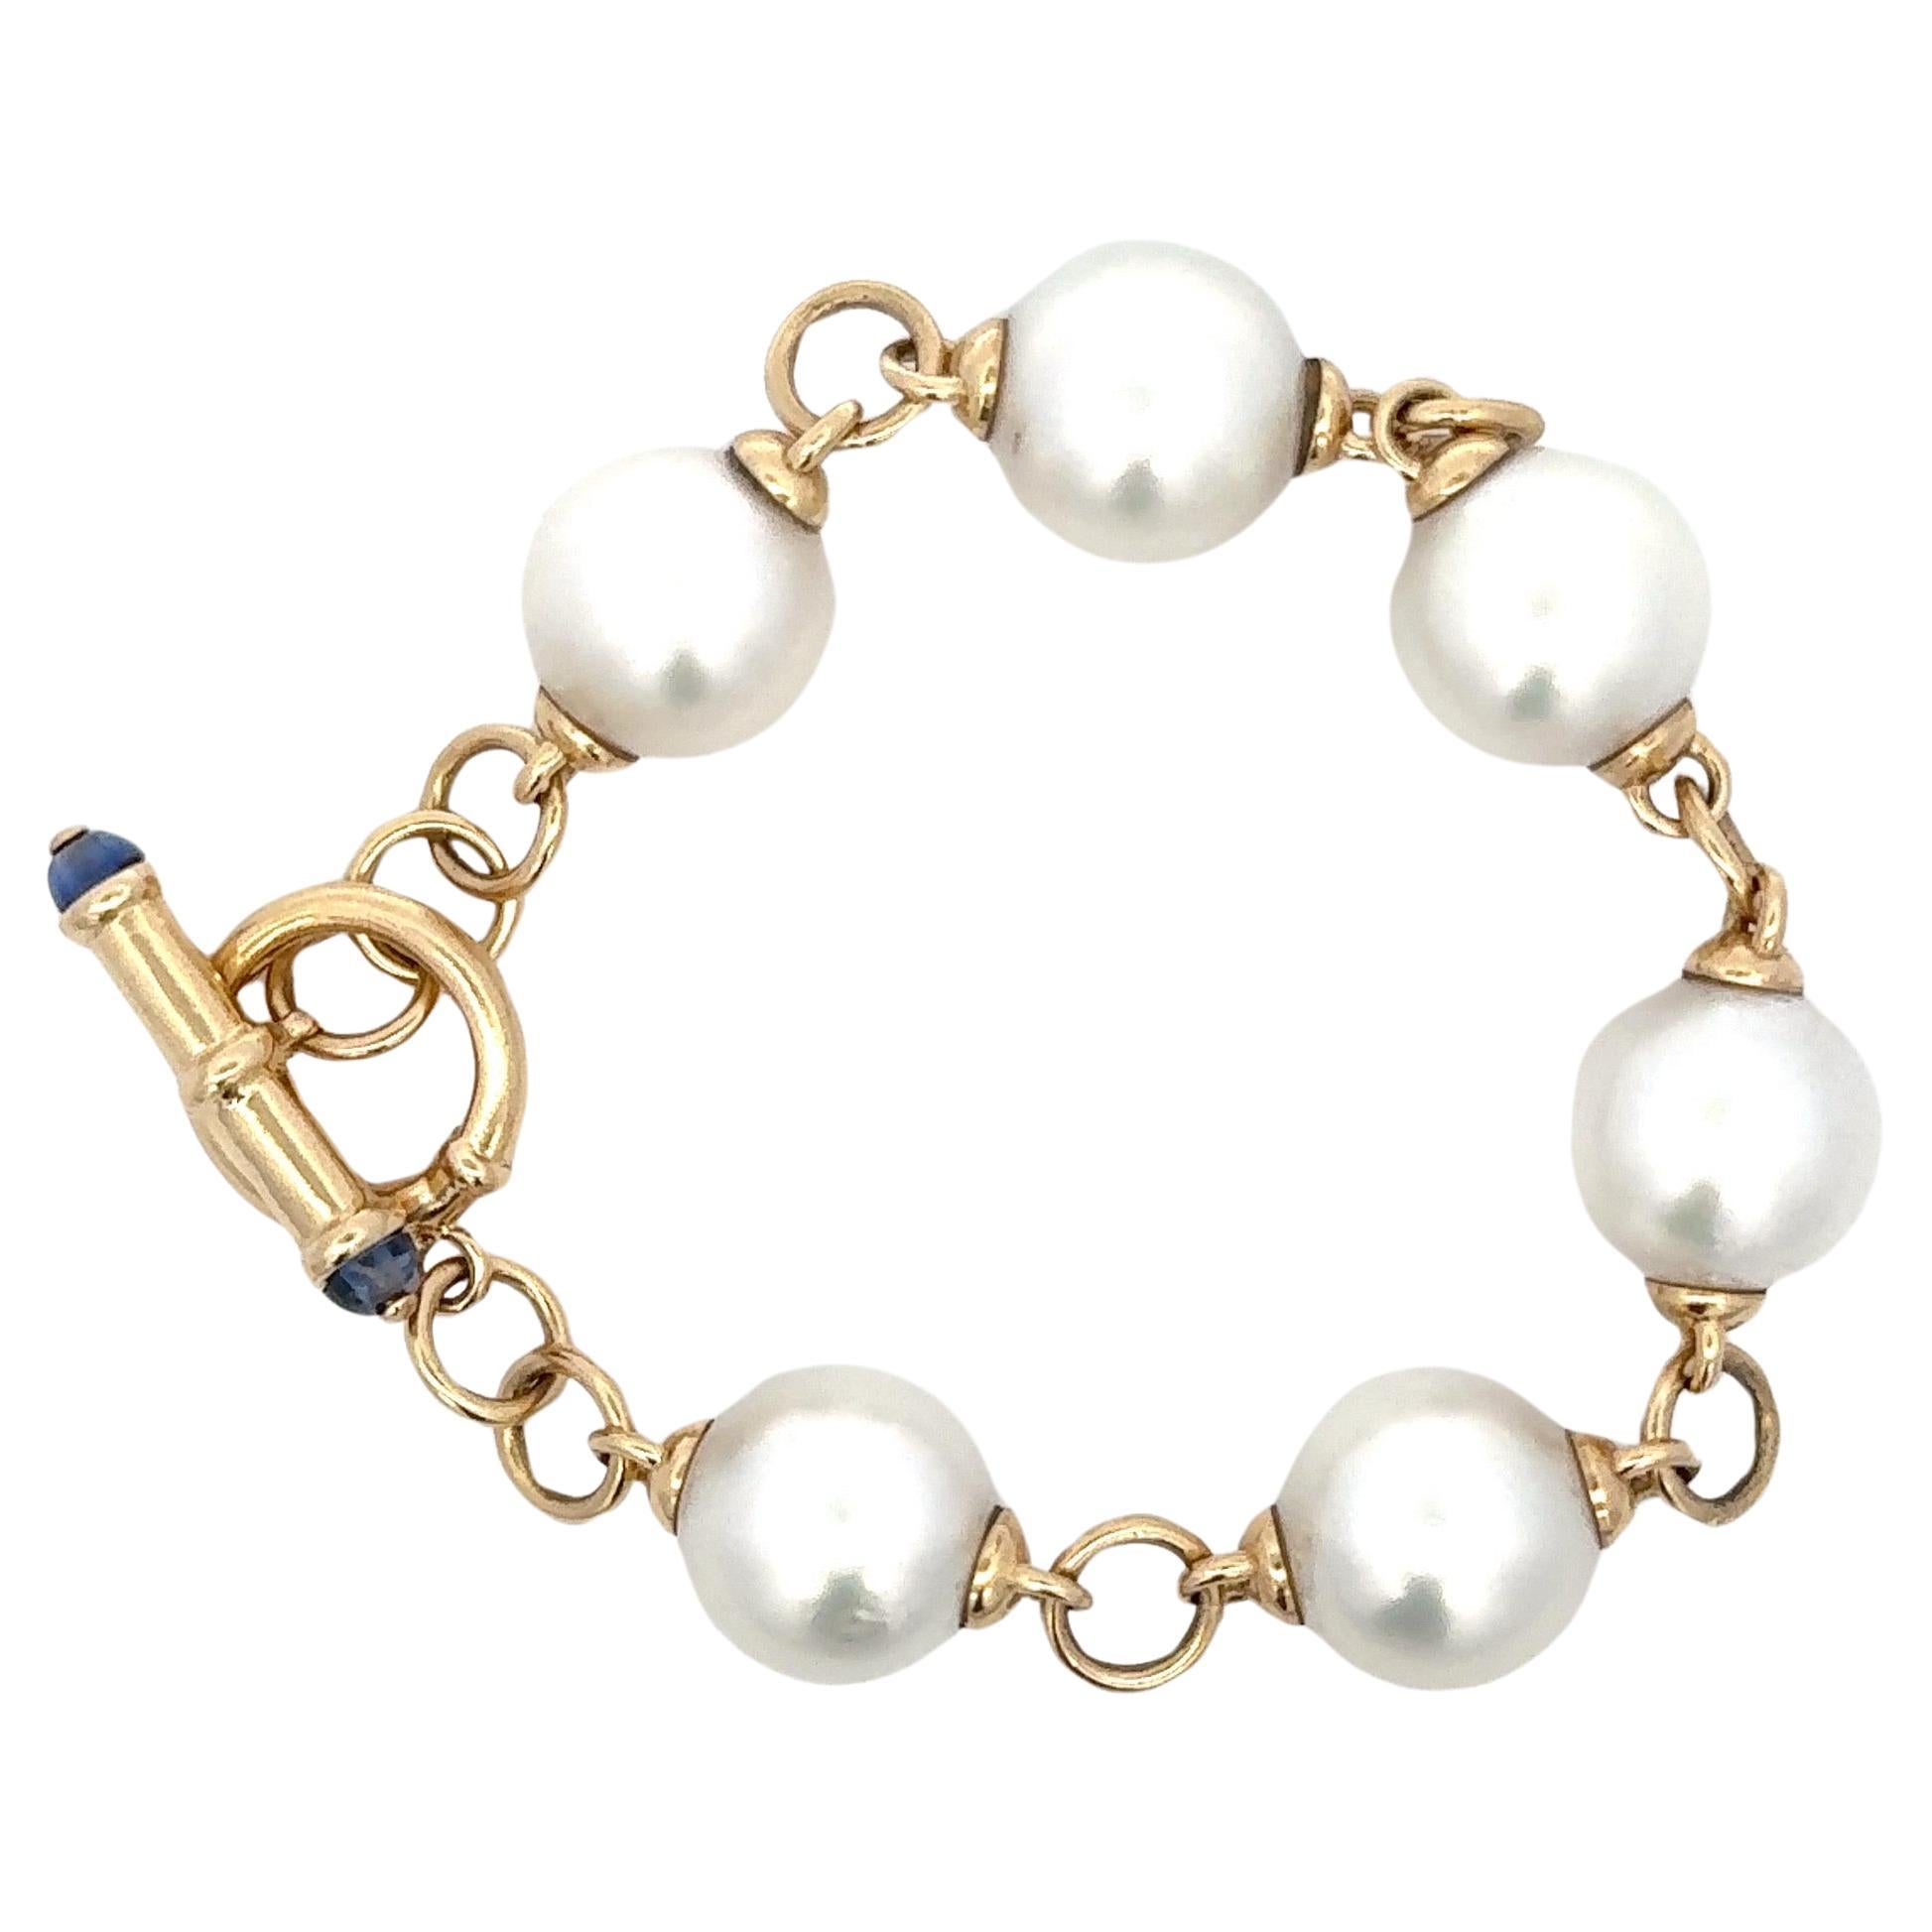 14 Karat yellow gold toggle link bracelet featuring 6 South Sea Pearls measuring 13.5 MM.
Cabochon Sapphire on Toggle Lock